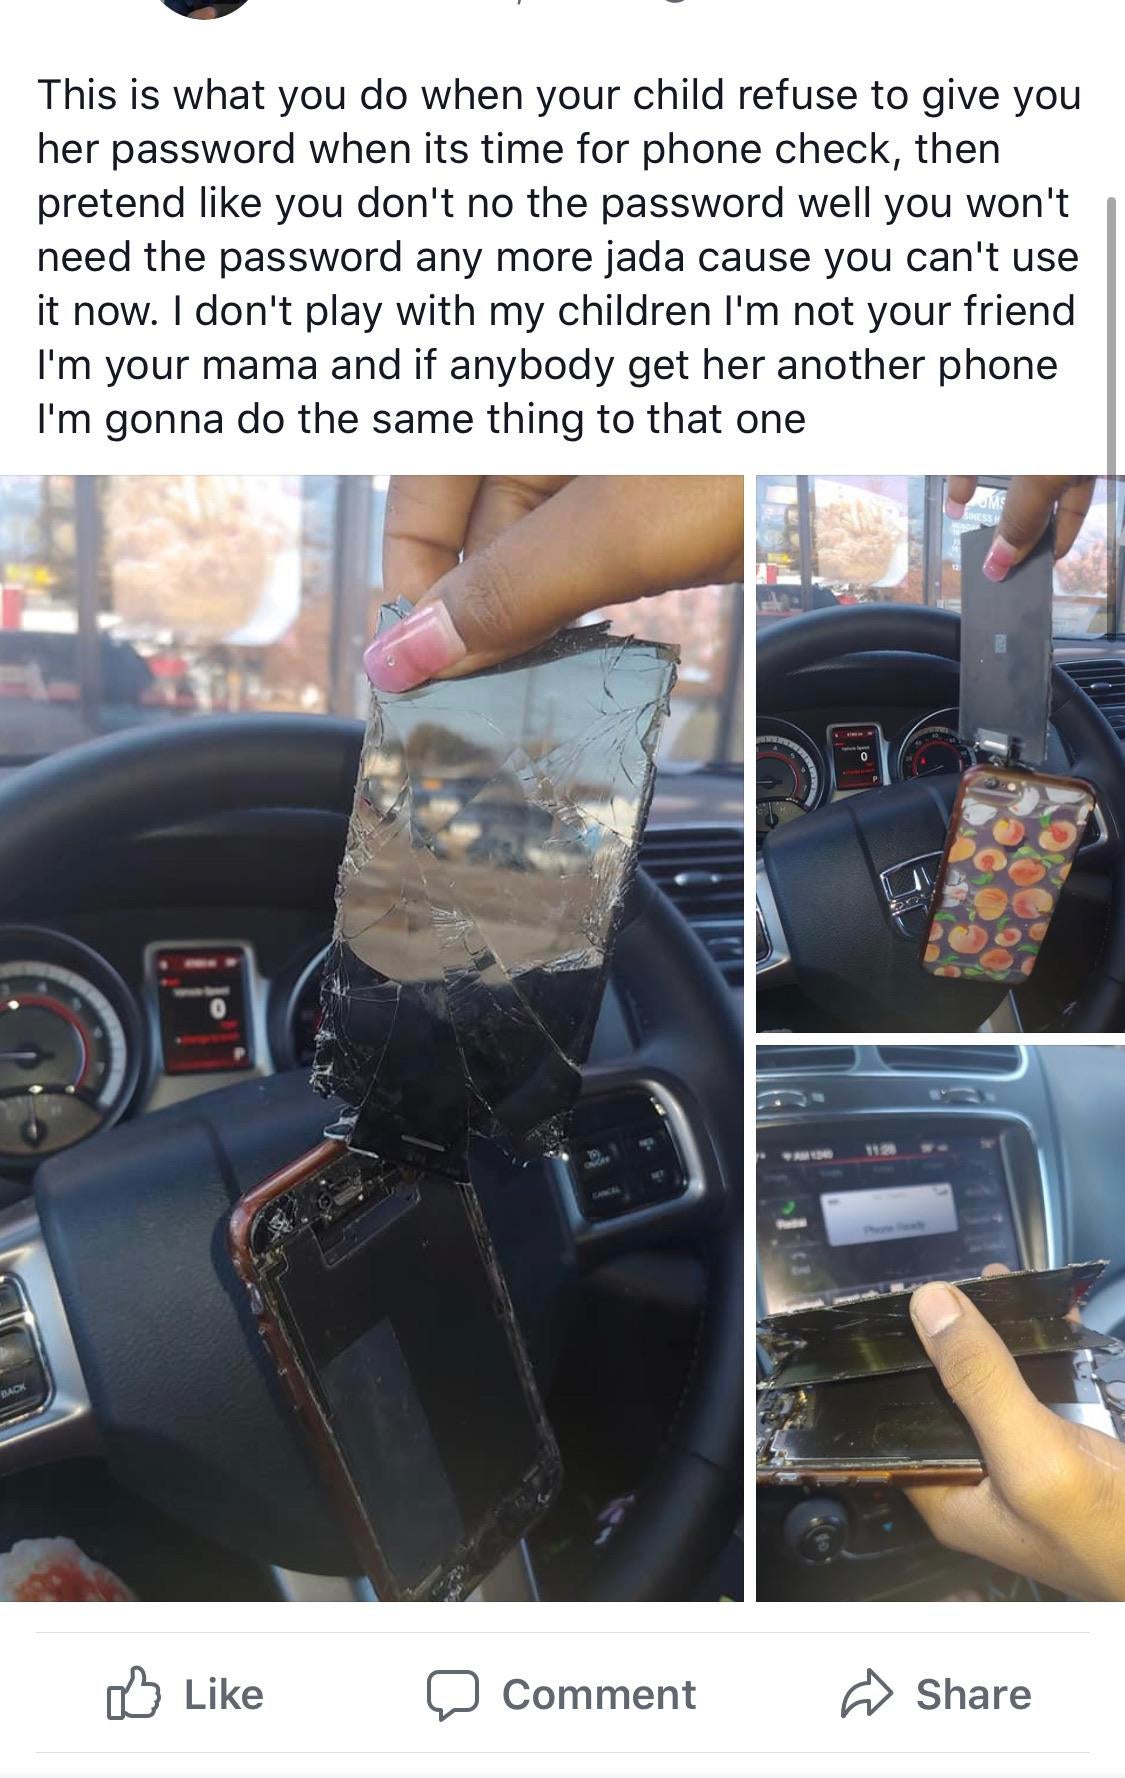 vehicle door - This is what you do when your child refuse to give you her password when its time for phone check, then pretend you don't no the password well you won't need the password any more jada cause you can't use it now. I don't play with my childr